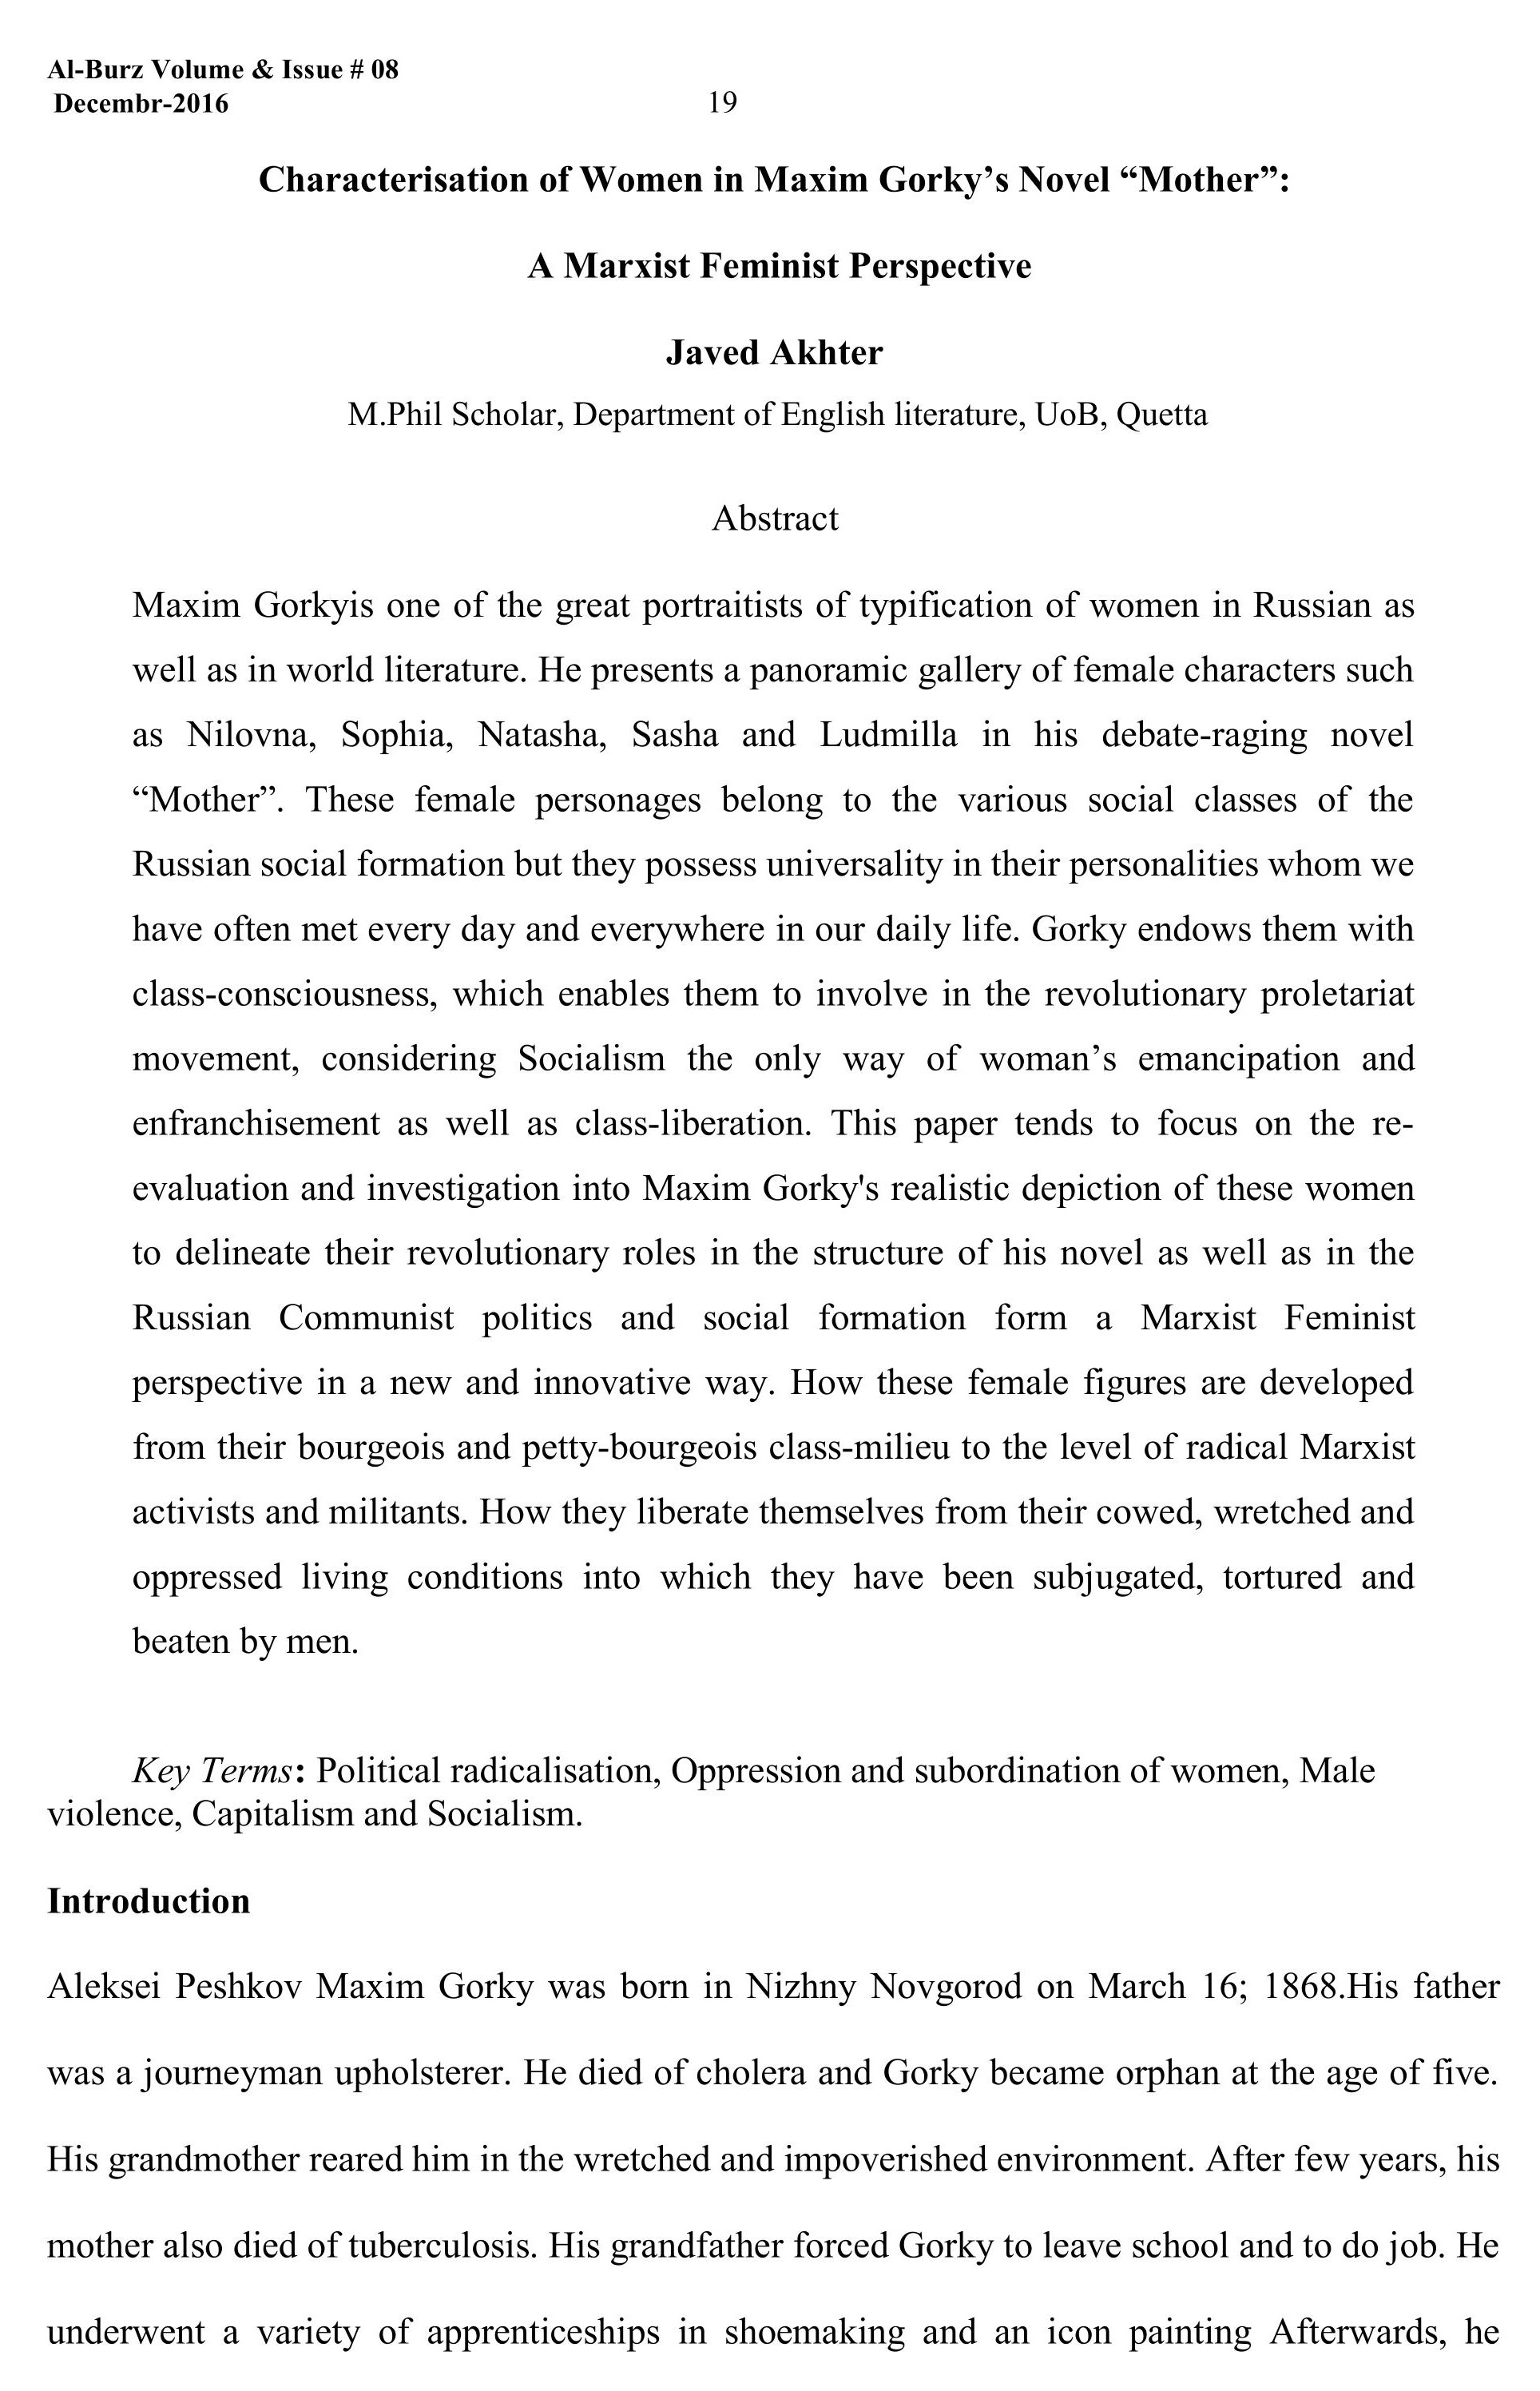 Characterisation of Women in Maxim Gorky’s Novel “Mother”:  A Marxist Feminist Perspective